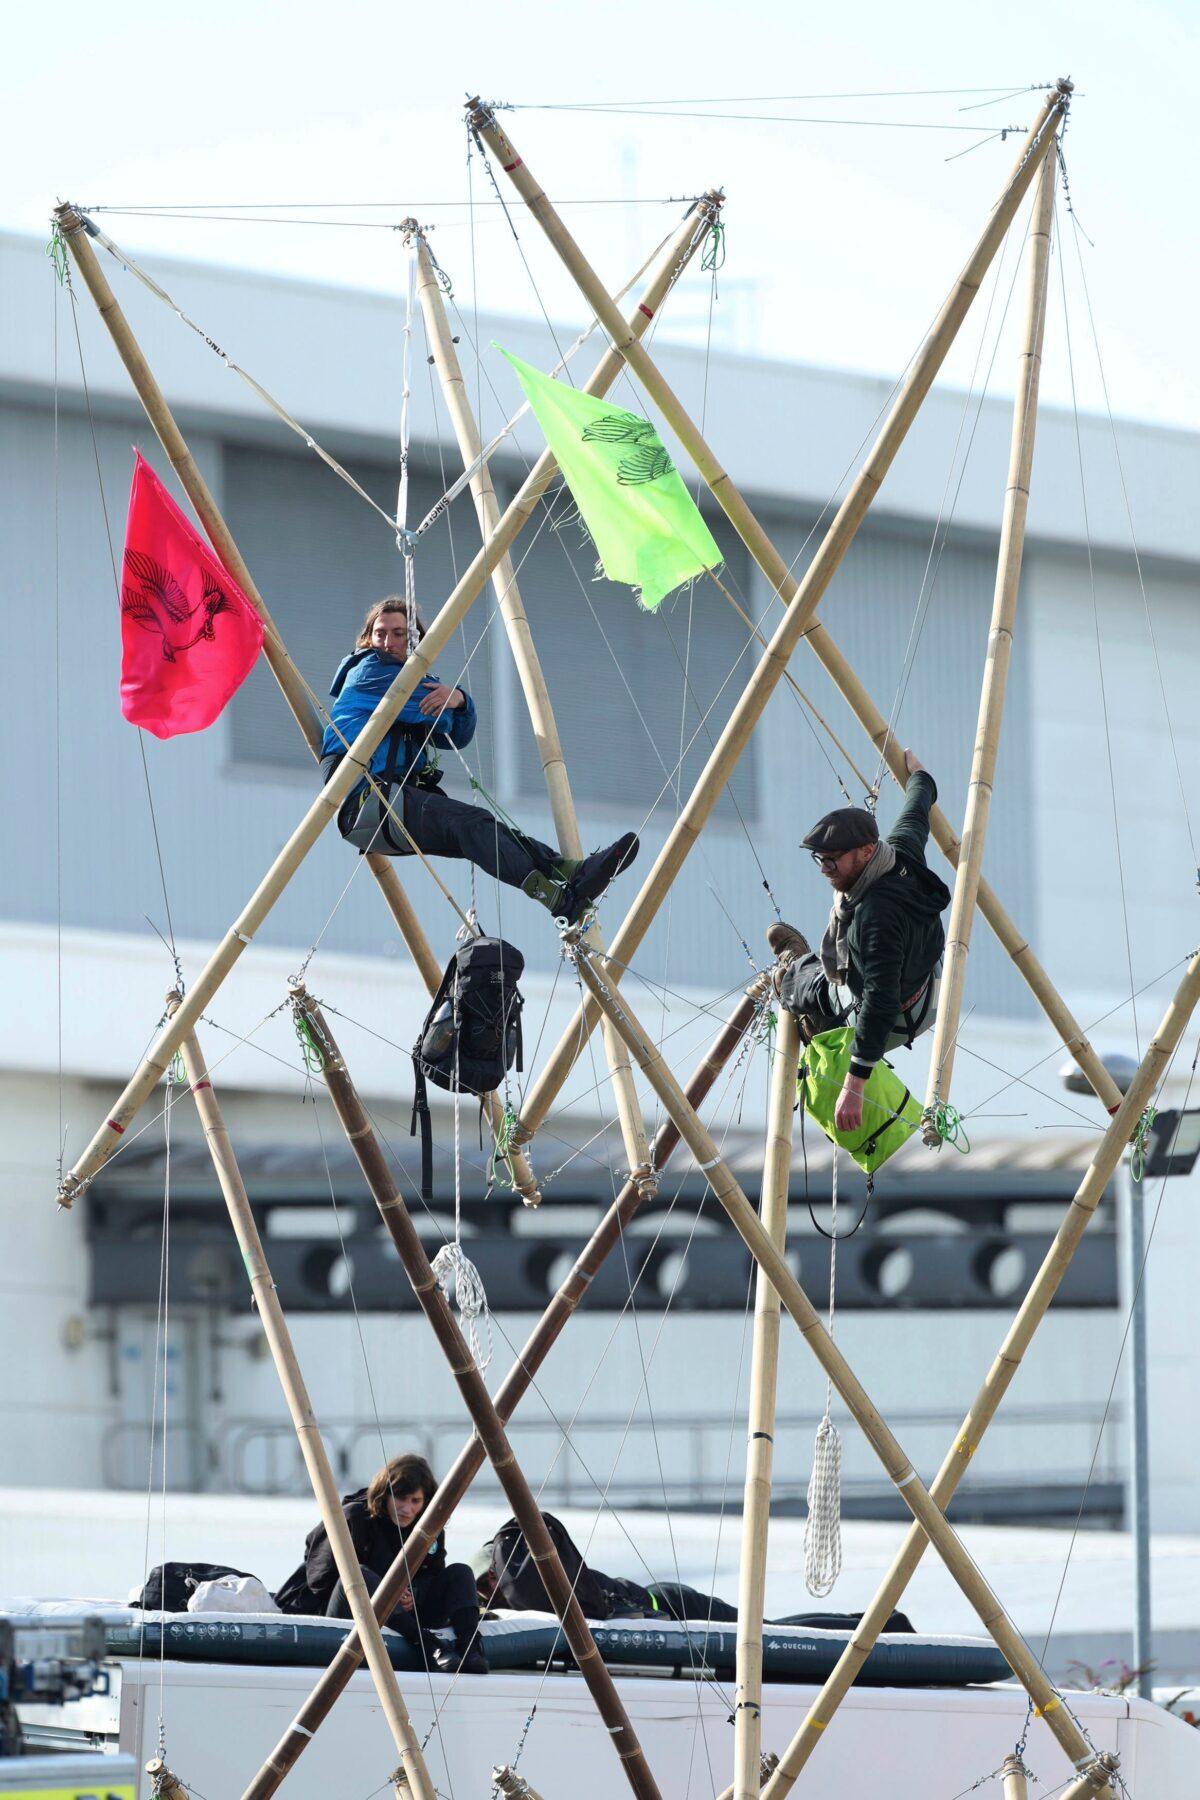 Two protesters attached to bamboo and two sitting on the roof of a van block the road, outside Broxbourne newsprinters in Hertfordshire, England, on Sept. 5, 2020. (Yui Mok/PA via AP)